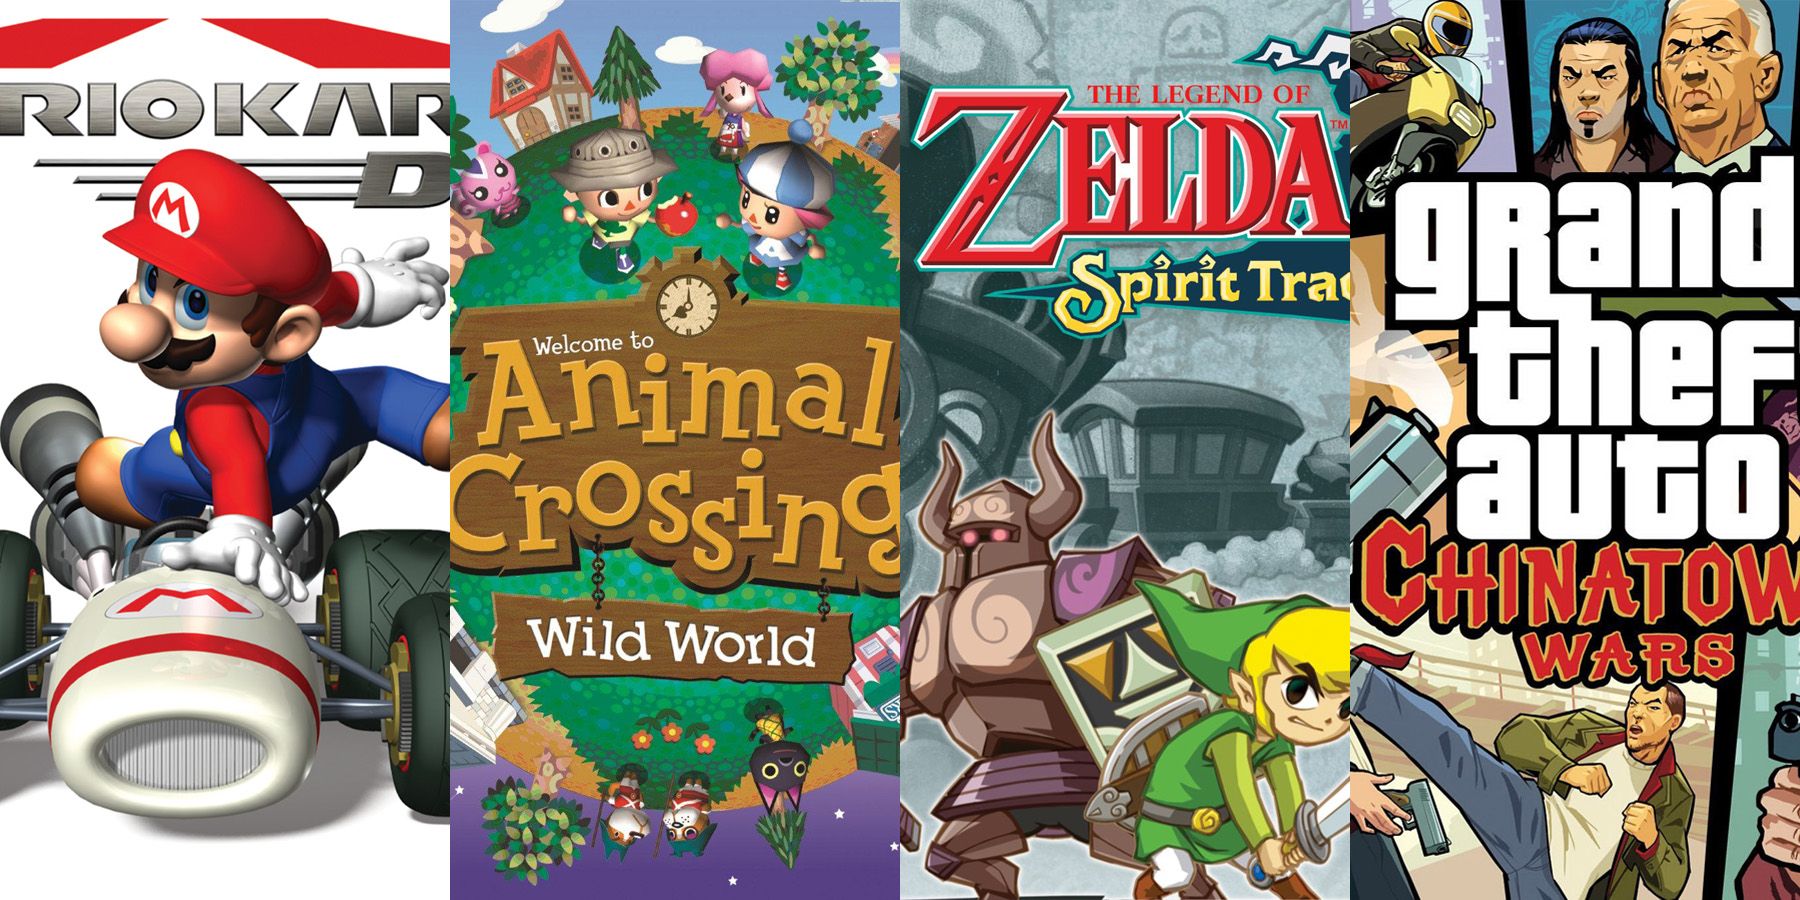 compressed box art for mario kart ds, animal crossing: wild world, the legend of zelda: spirit traces and gta chinatown wars